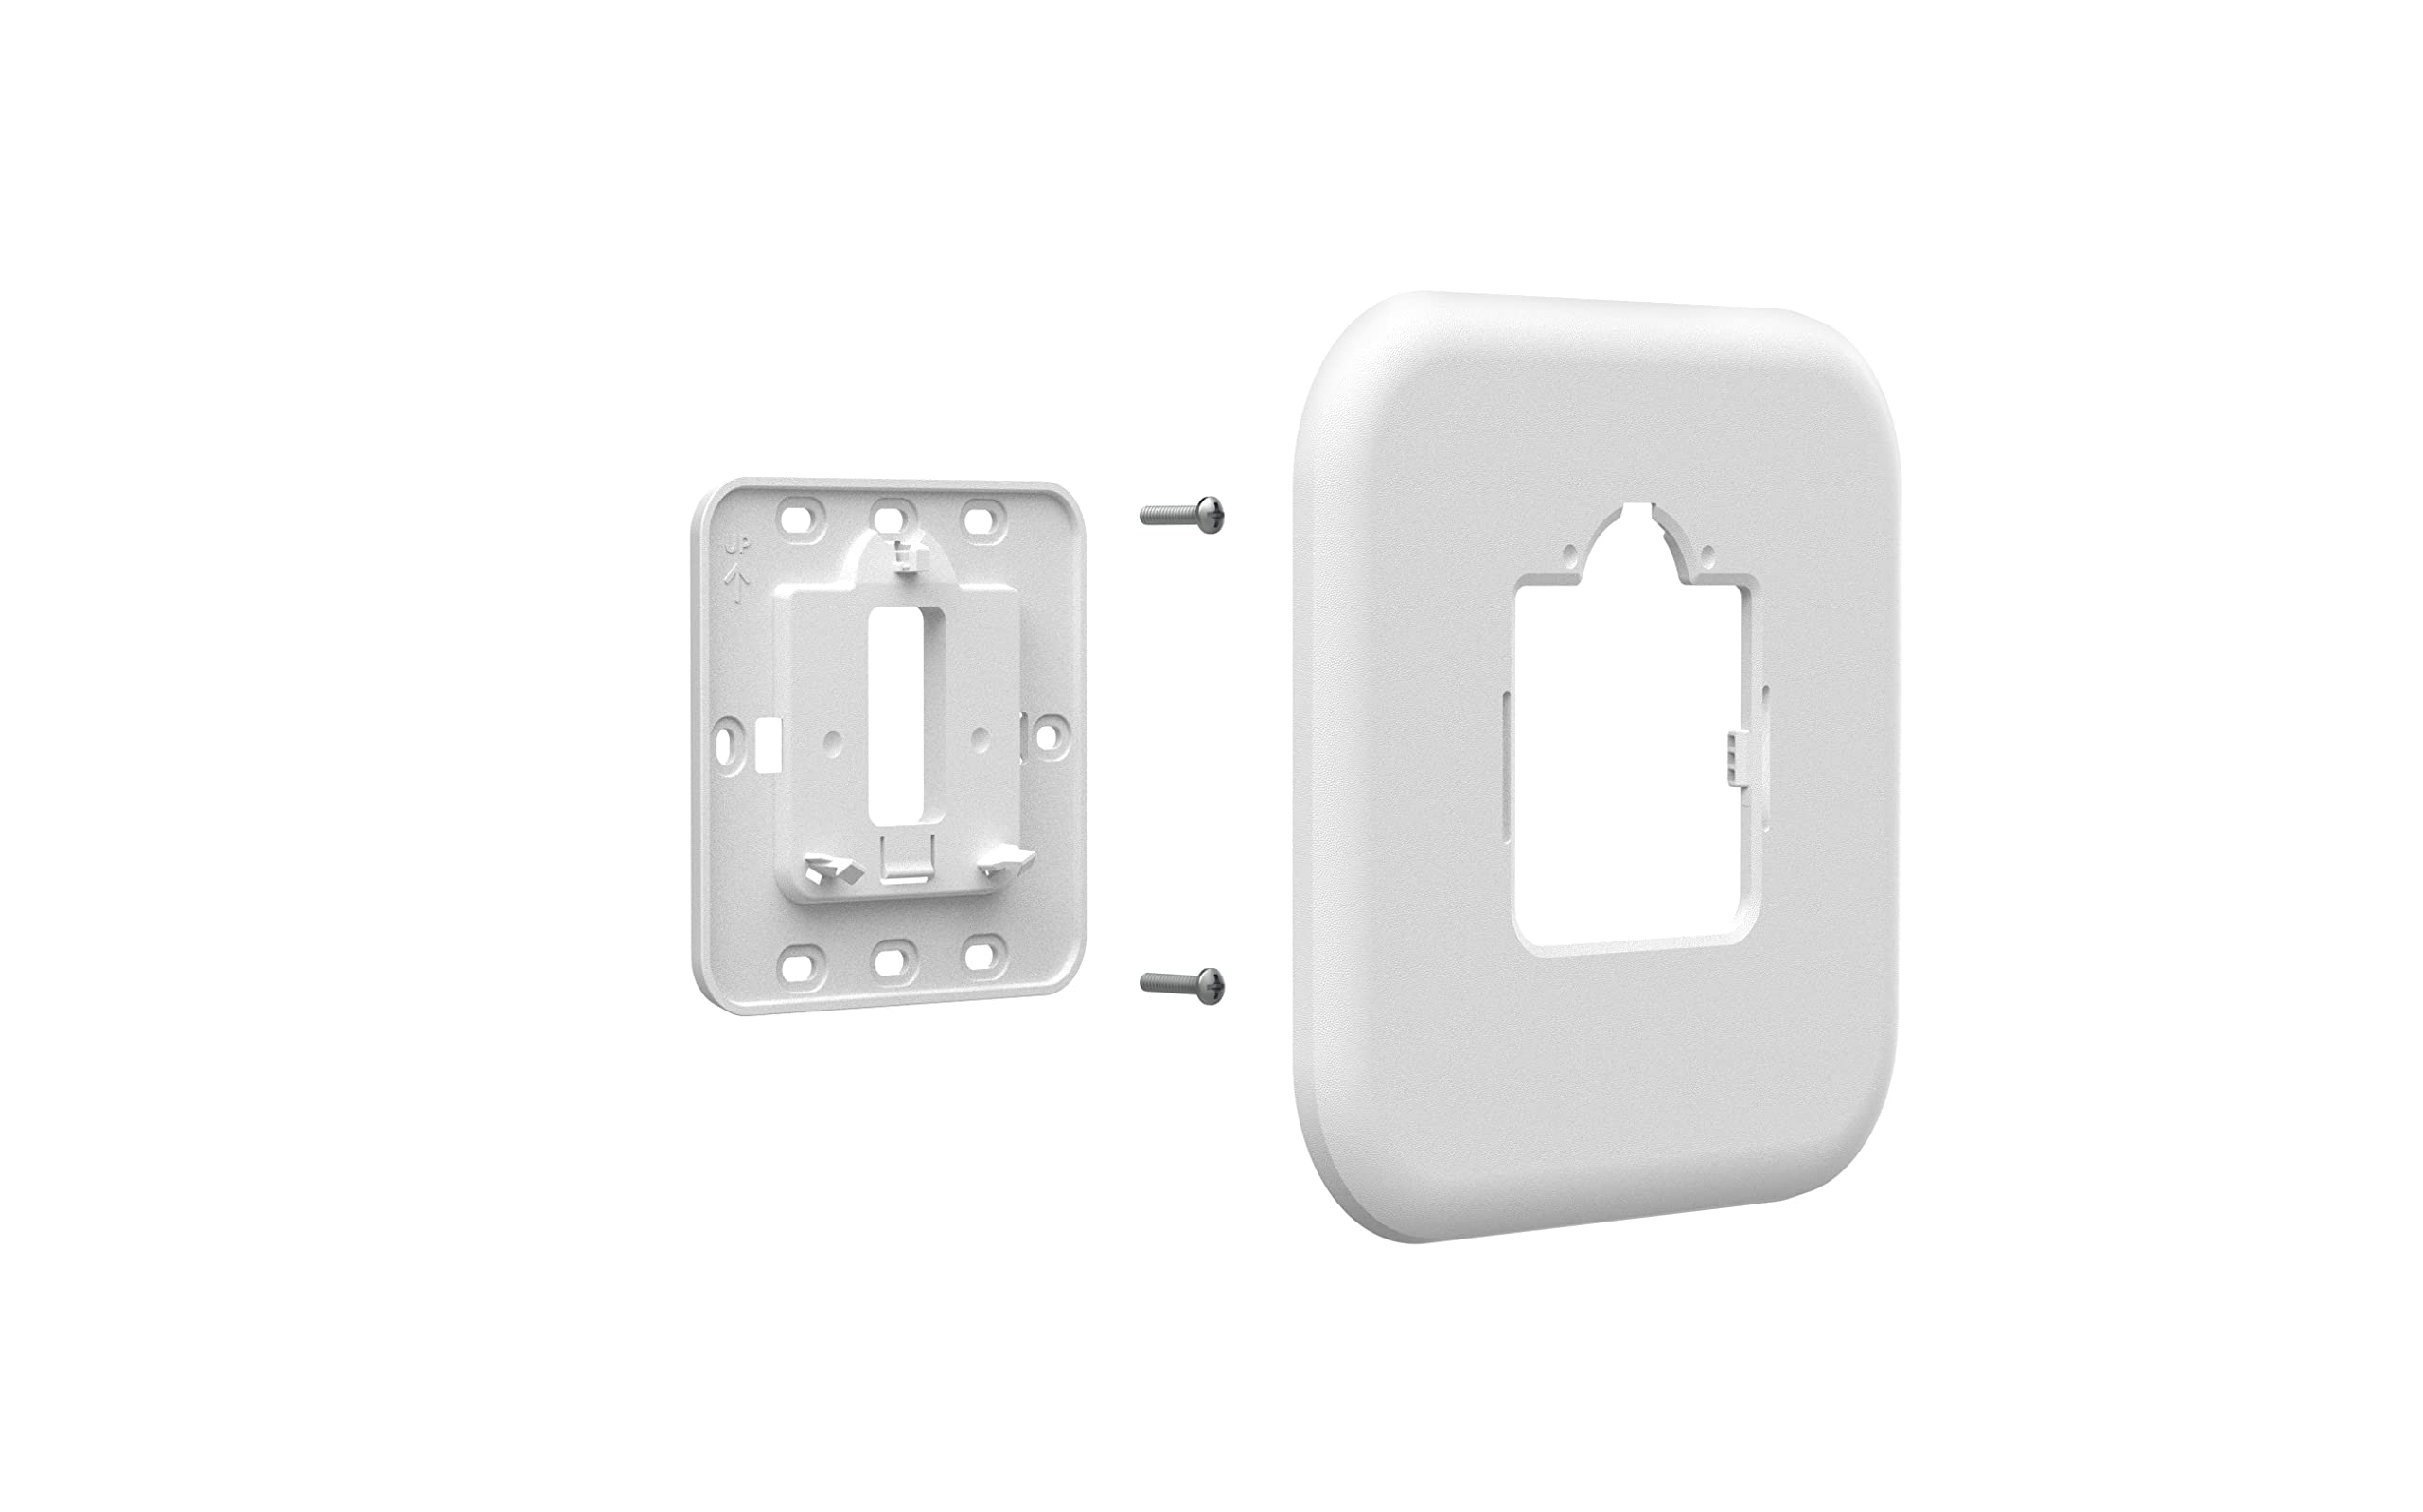 Honeywell Home Large Cover Plate & Electrical Box Adaptor for T-Series Thermostats (THP2400A1080) , White